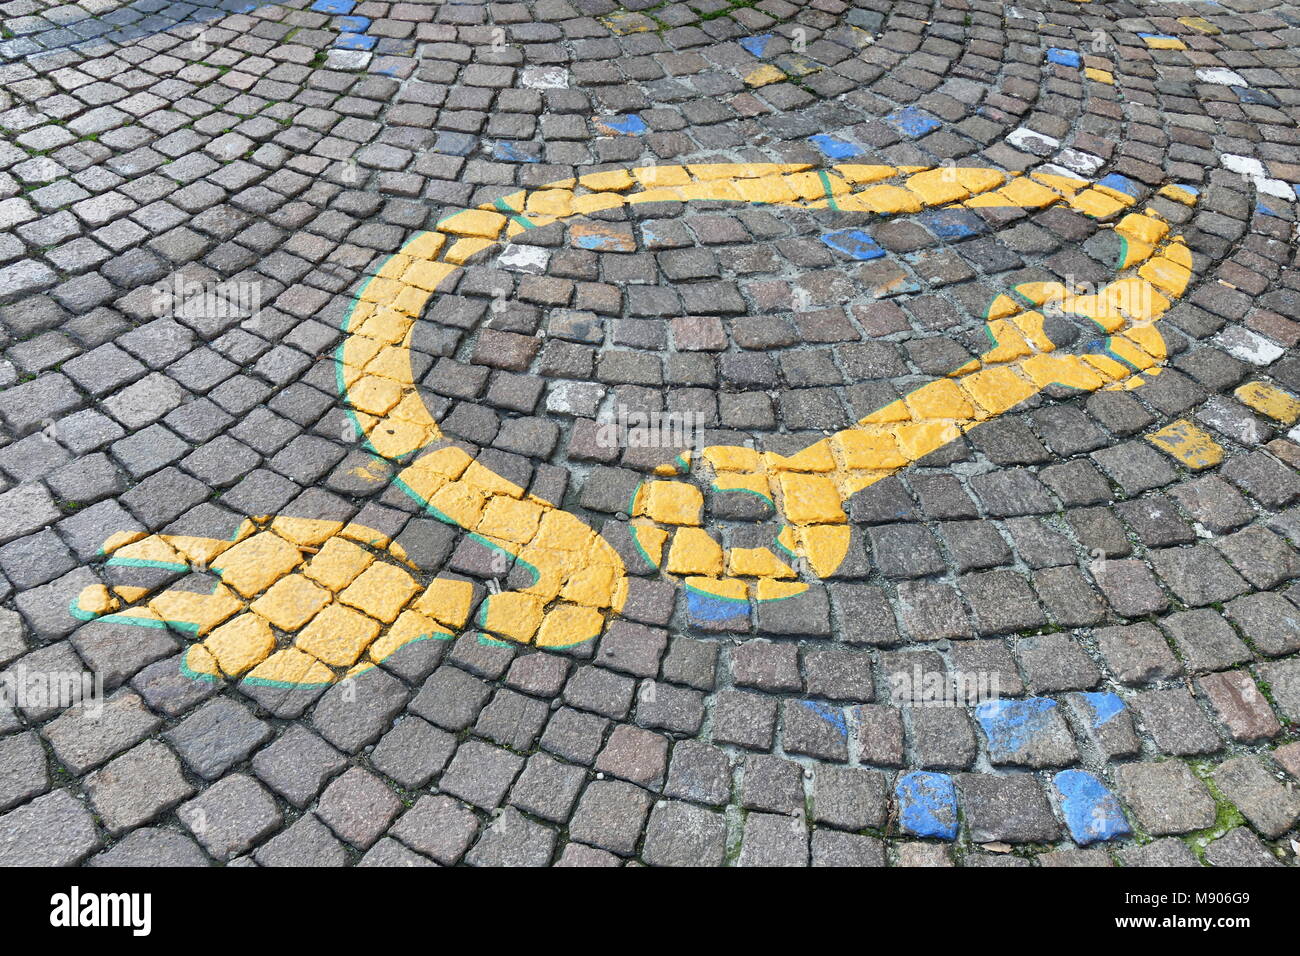 Electric car logo painted on soil in reserved parking zone near docking station Turin Italy March 14 2018 Stock Photo